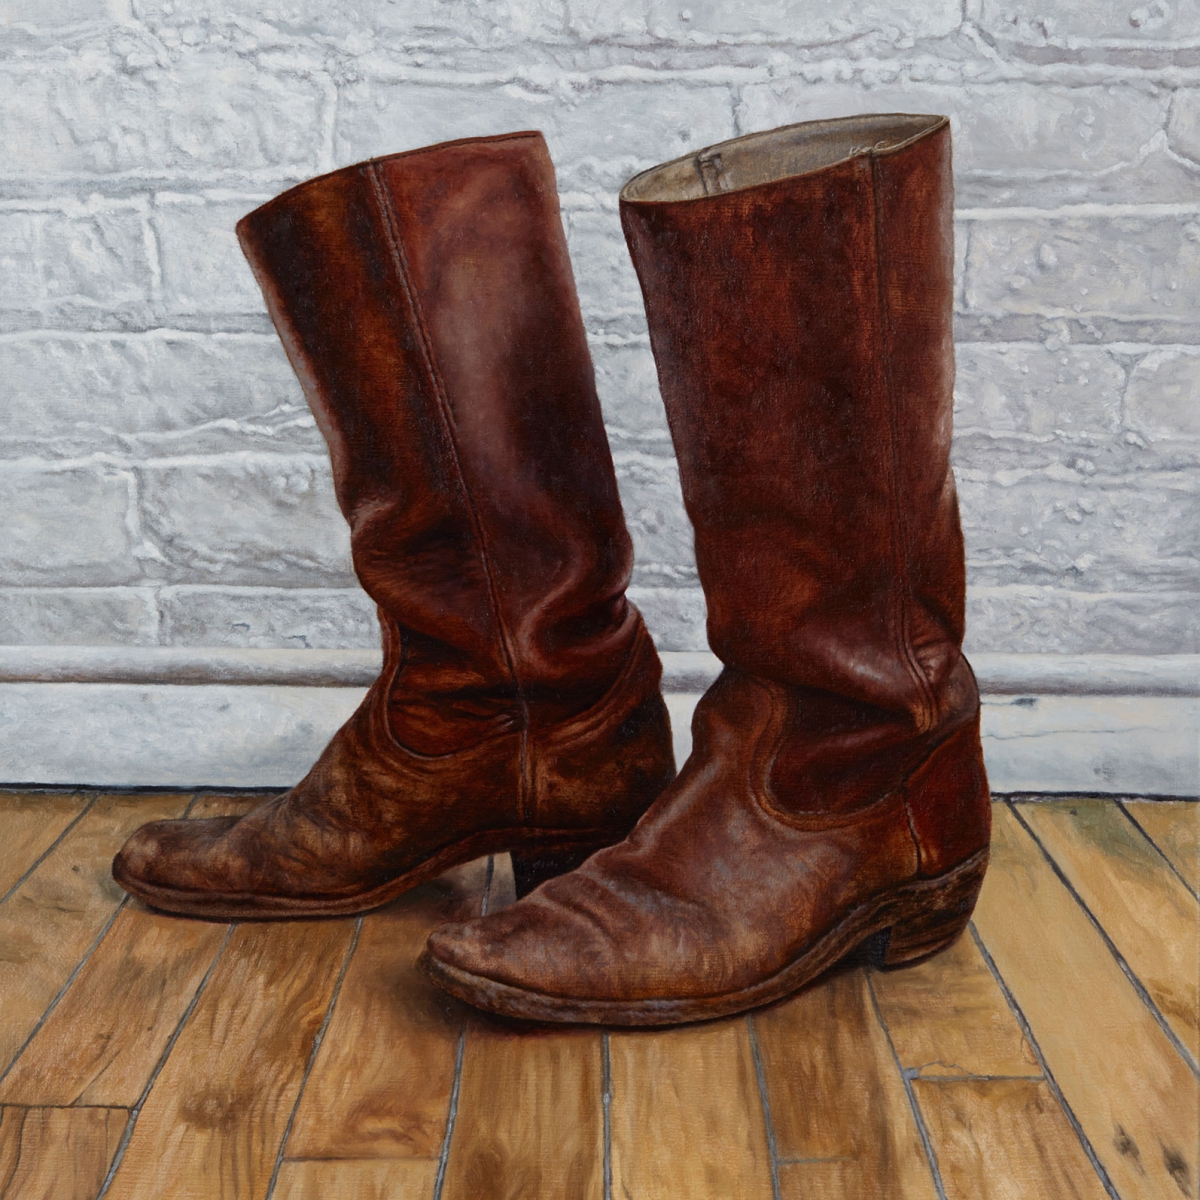 My Father’s Worn Boots : RJD Gallery